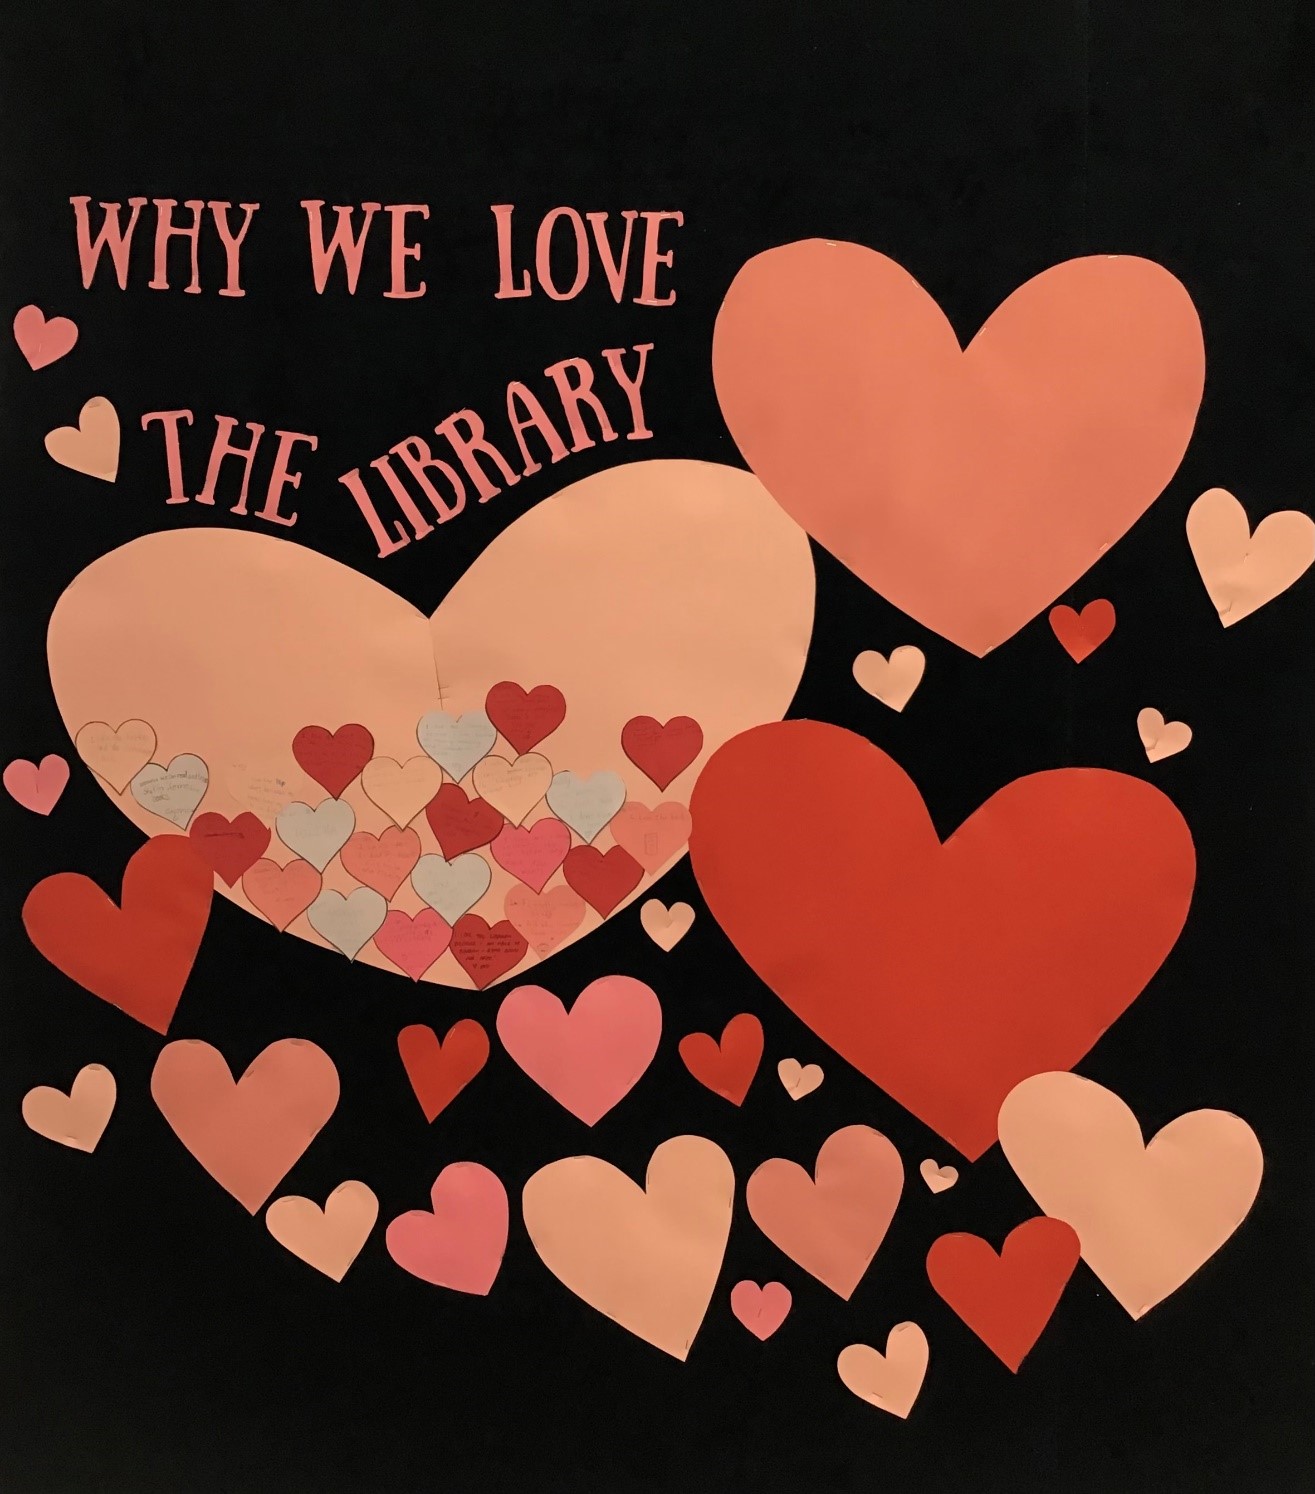 Library_lovers_pic.jpg